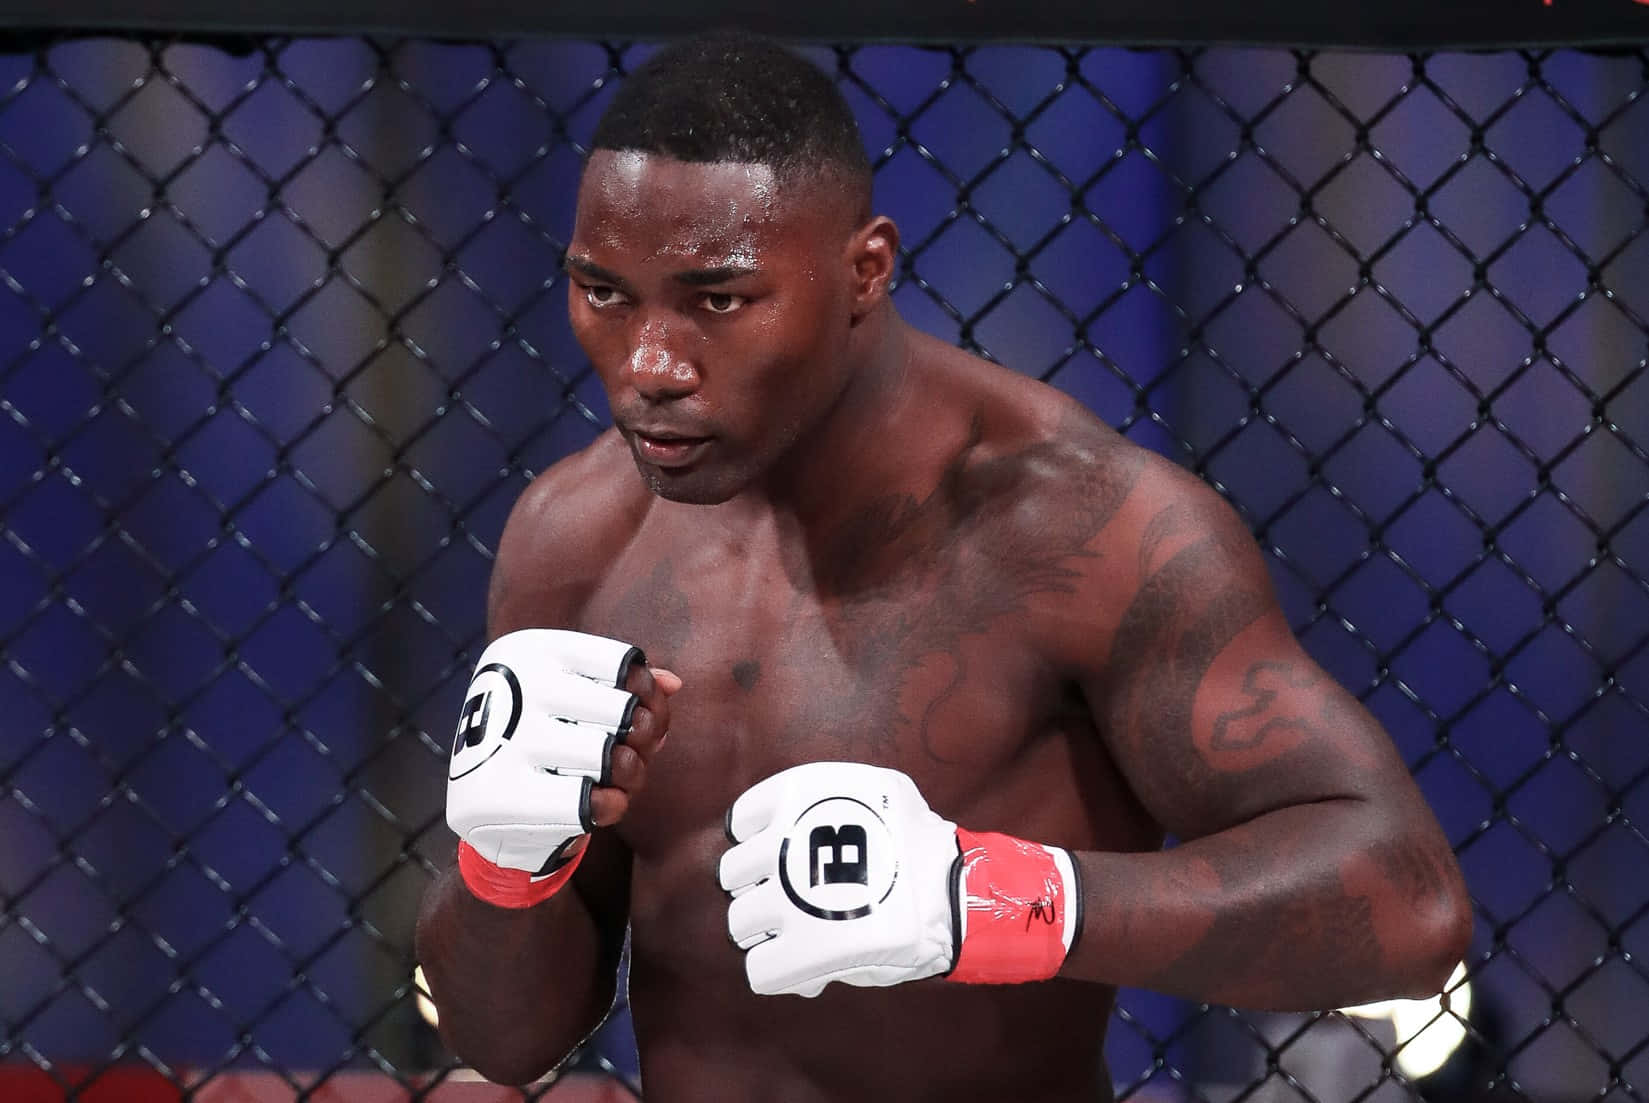 Anthonyjohnson 2021 Bellator Match Would Be Translated To 